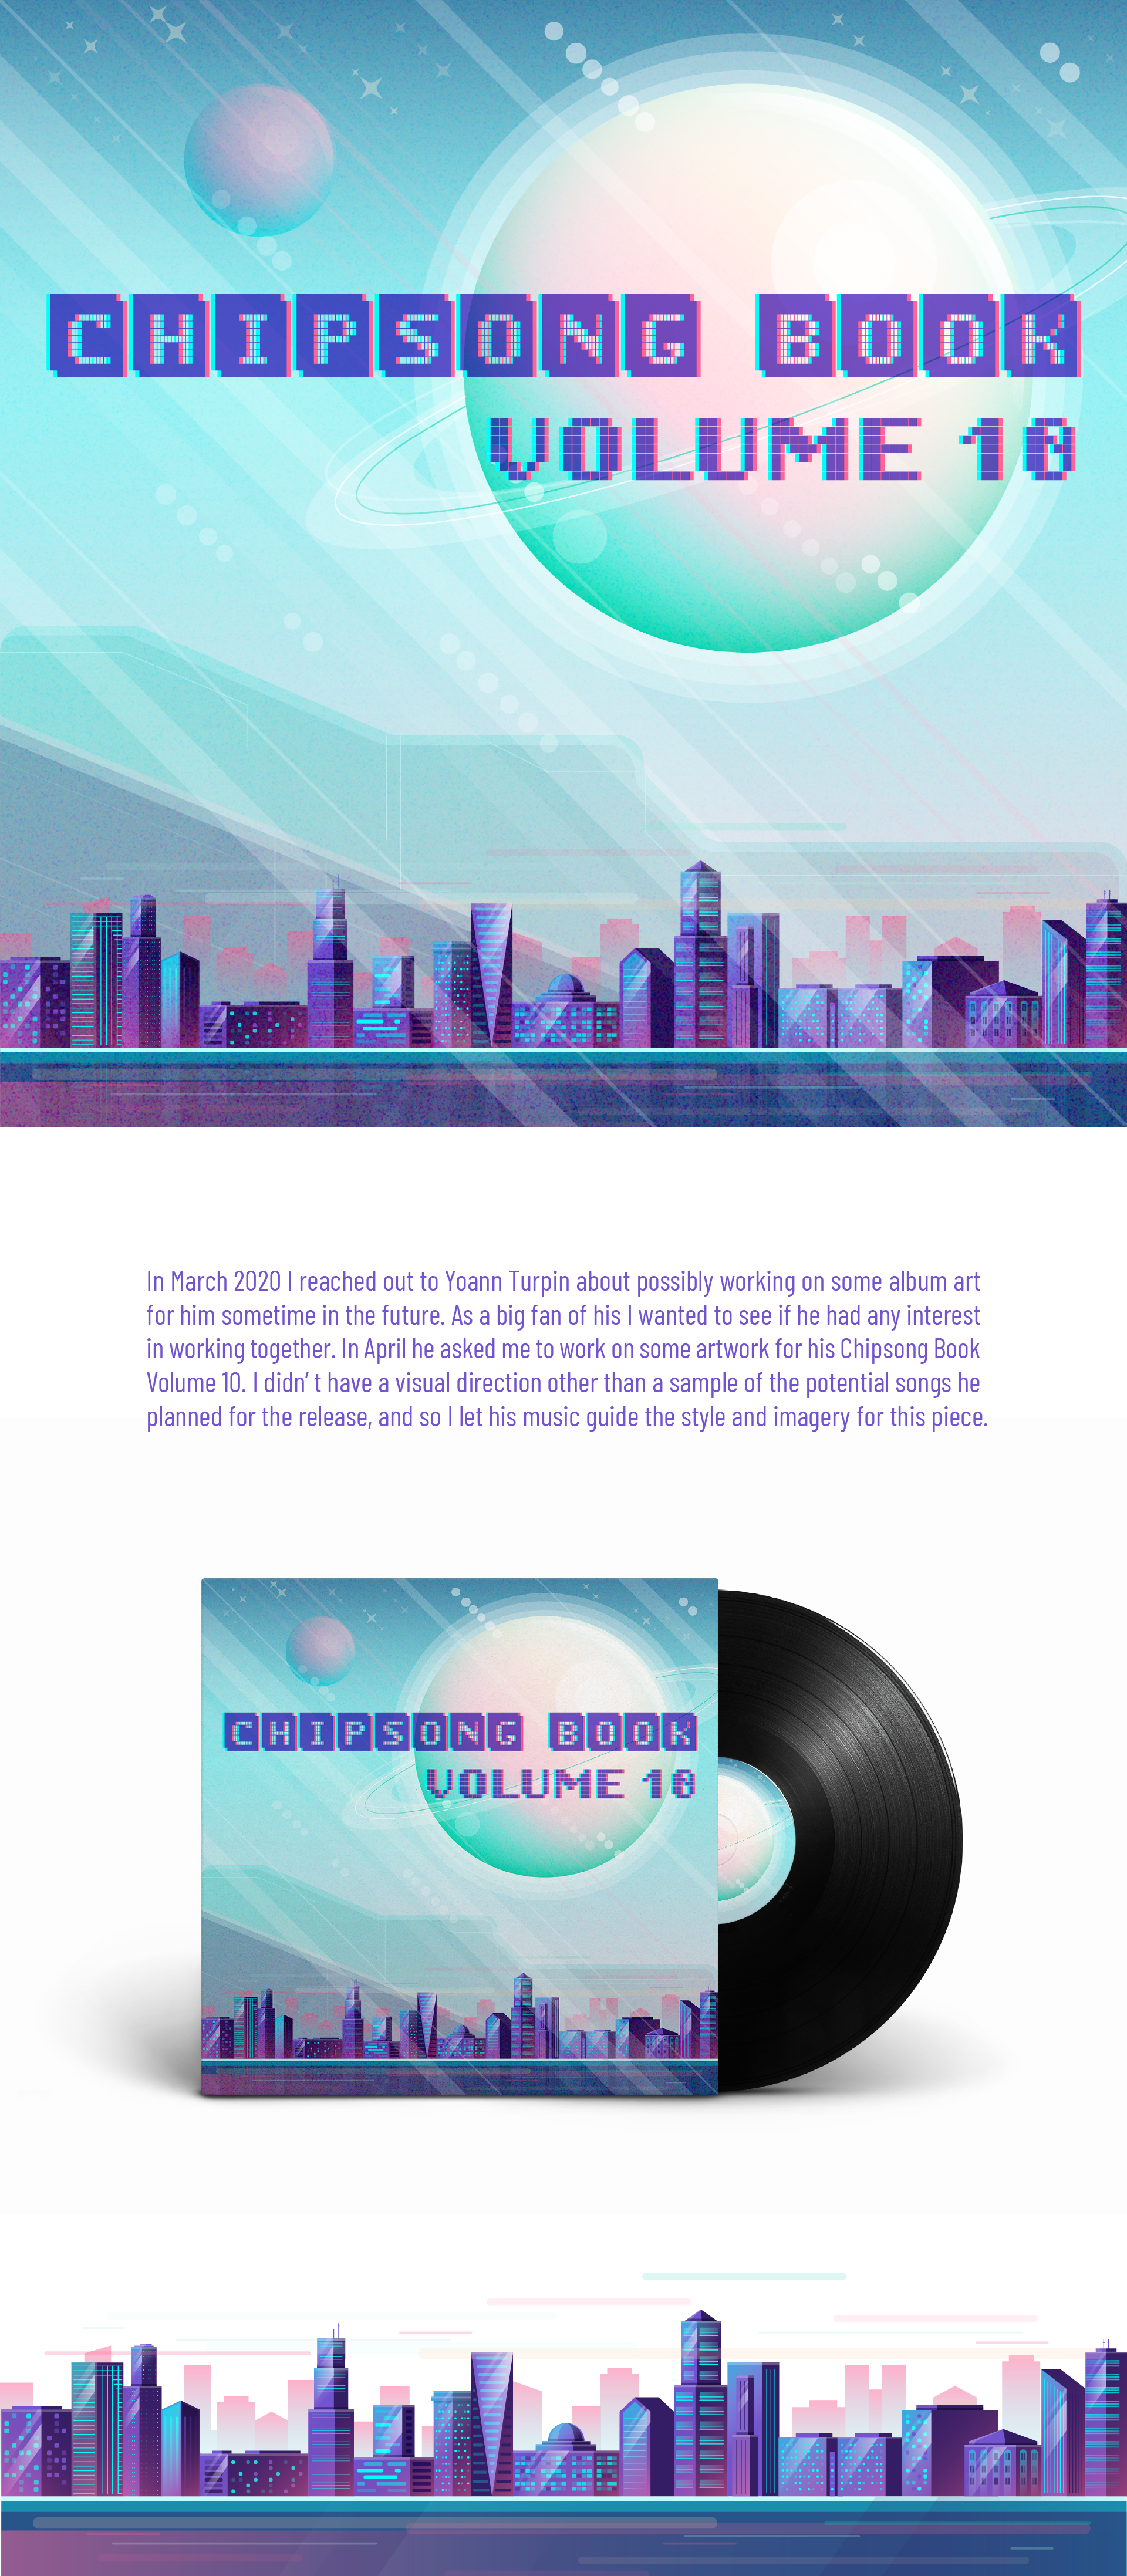 ChipSong Book Volume 10 cover art featuring a large planet with a thin ring bearing down on a futuristic cityscape.

A mockup of a vinyl record album with the cover art and a closeup of the cityscape are below.